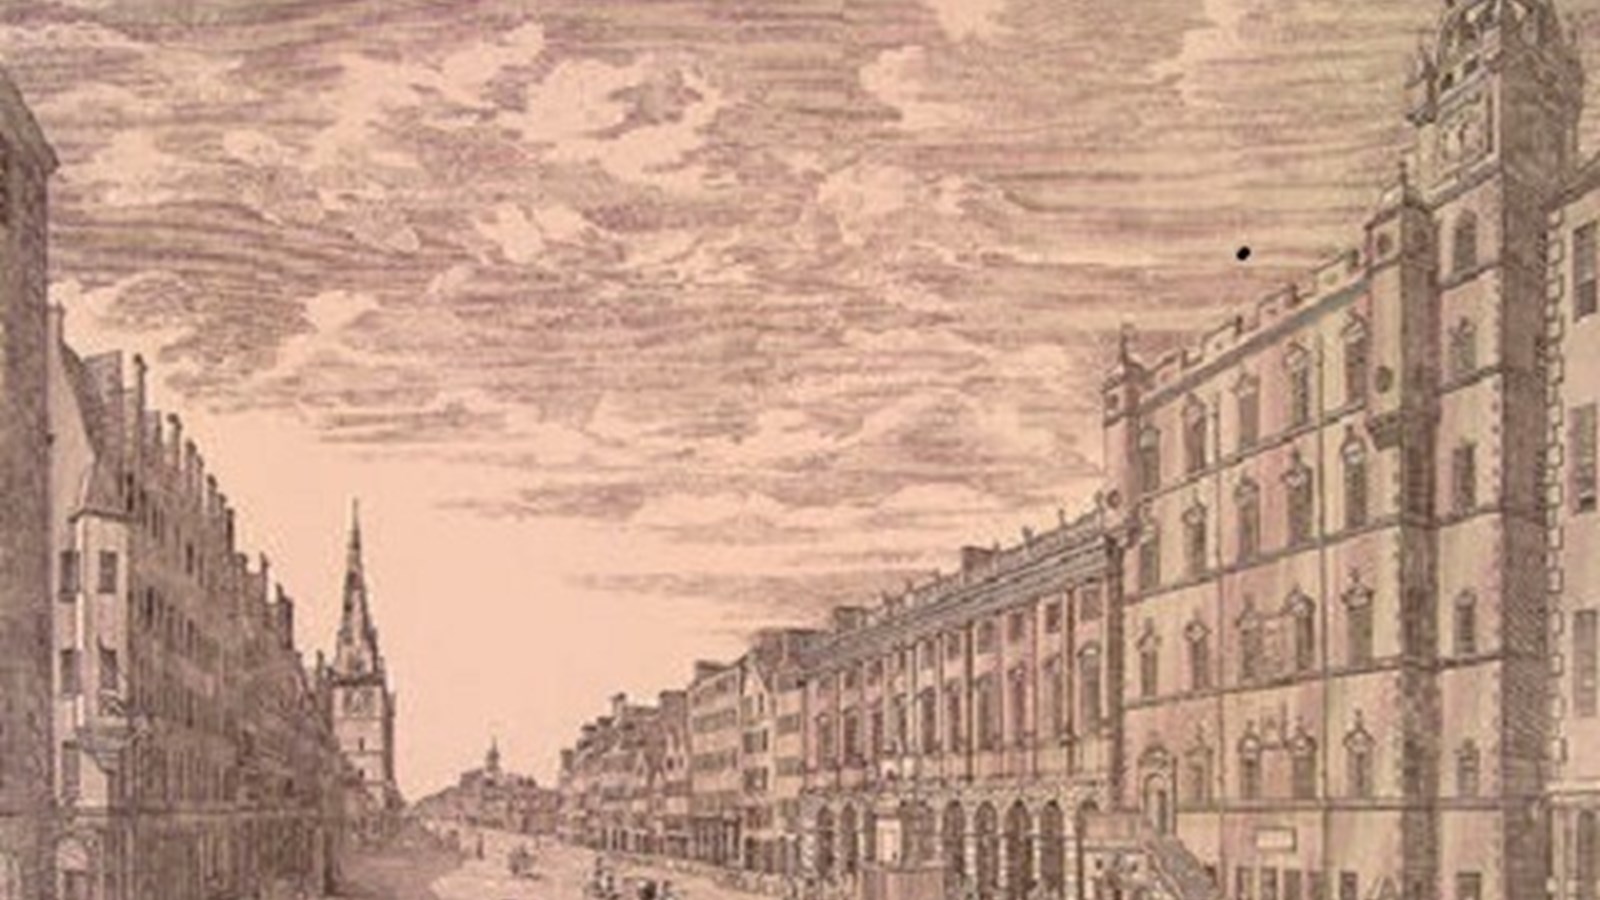 A drawing of a Glasgow street showing the steeple that now remains at Trongate. There are people walking in the street along with horse and carriages.